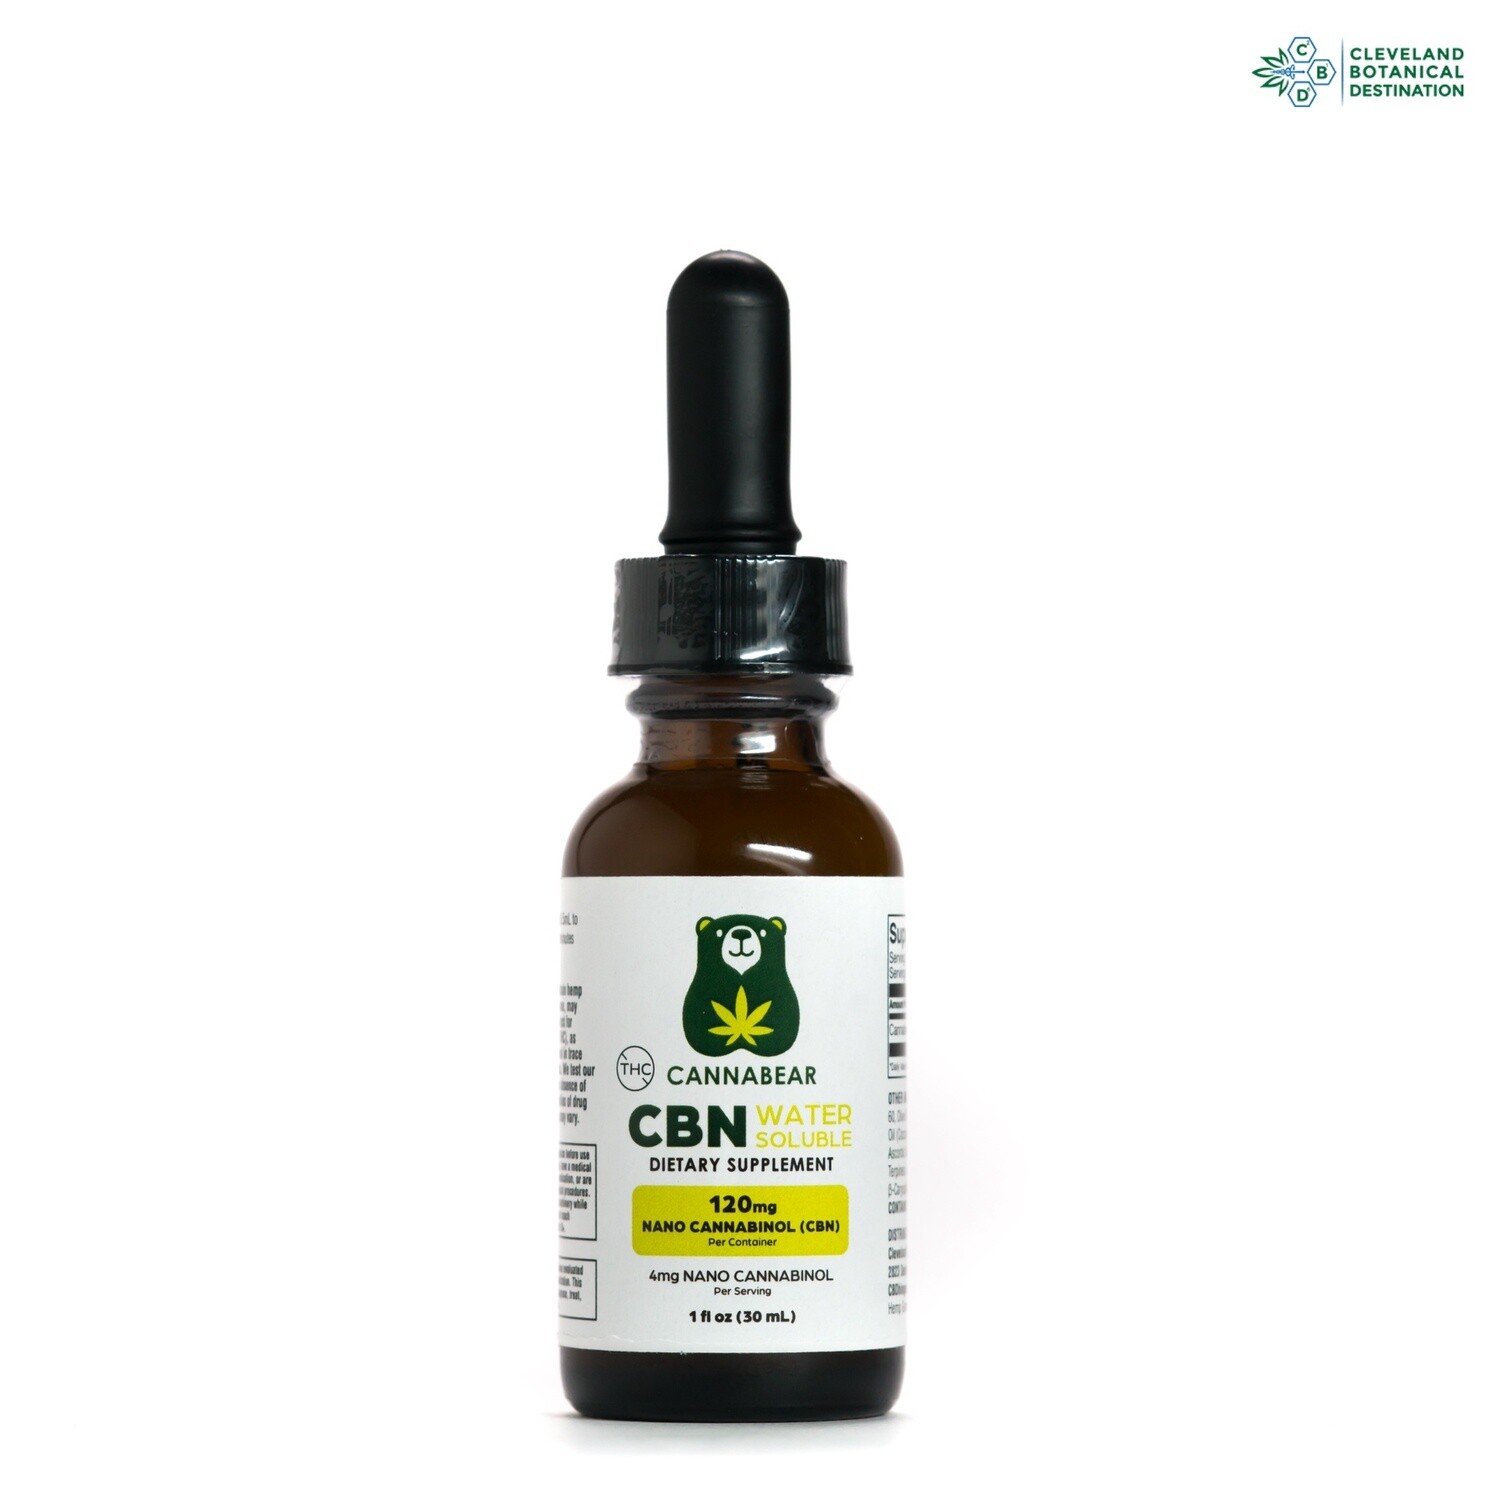 Cannabear Water Soluble CBN Tincture 120mg (Fast Acting, Nano)